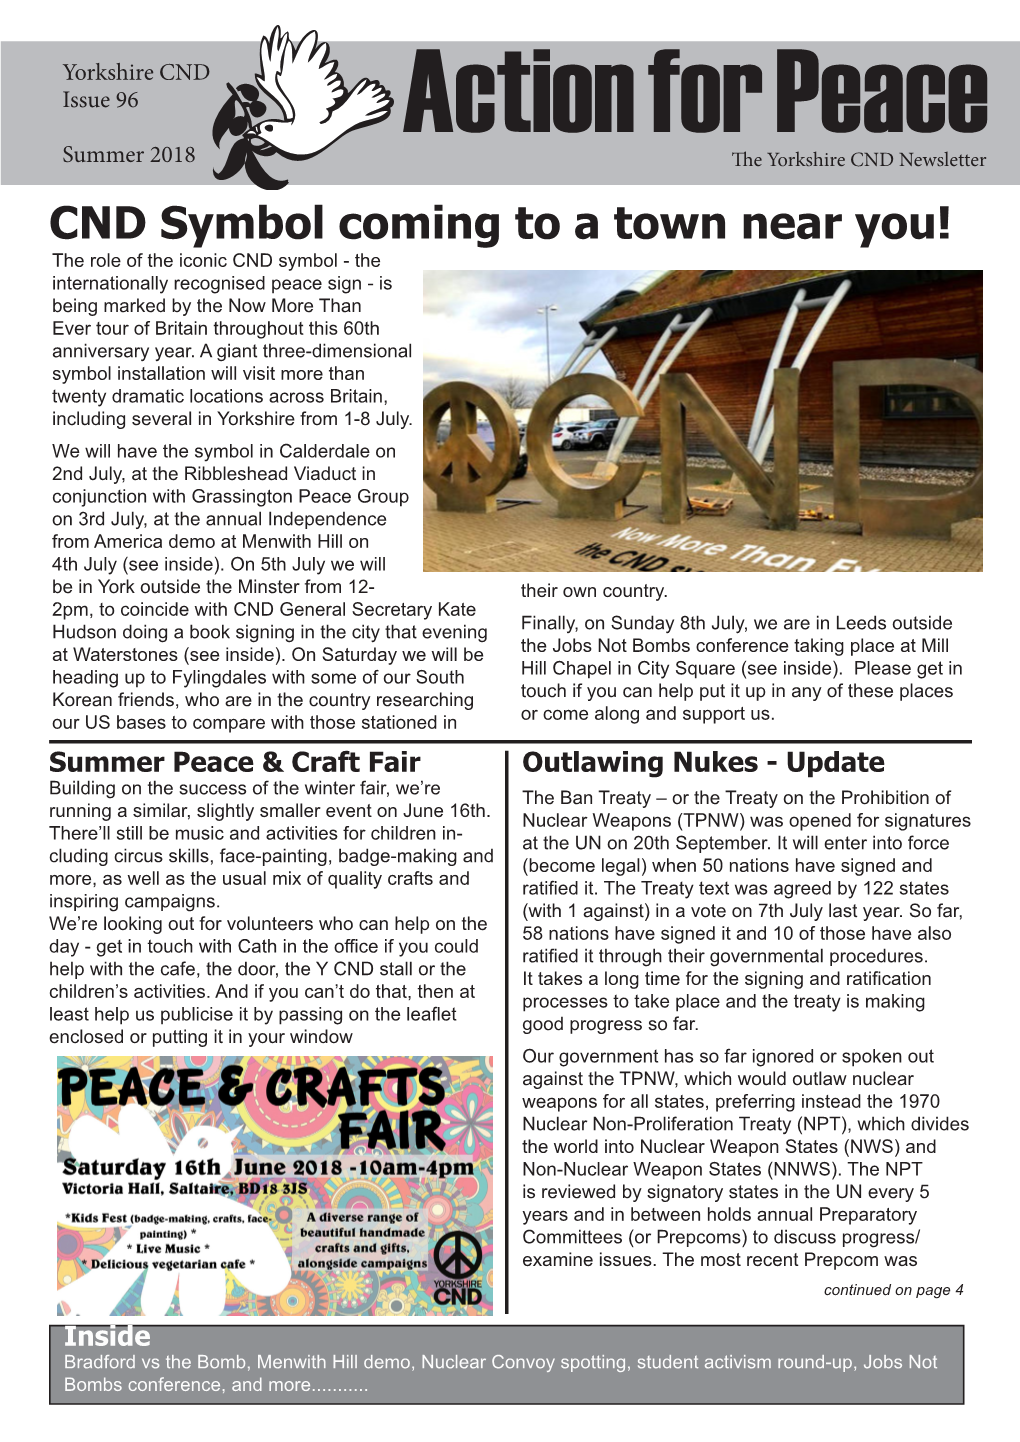 CND Symbol Coming to a Town Near You!